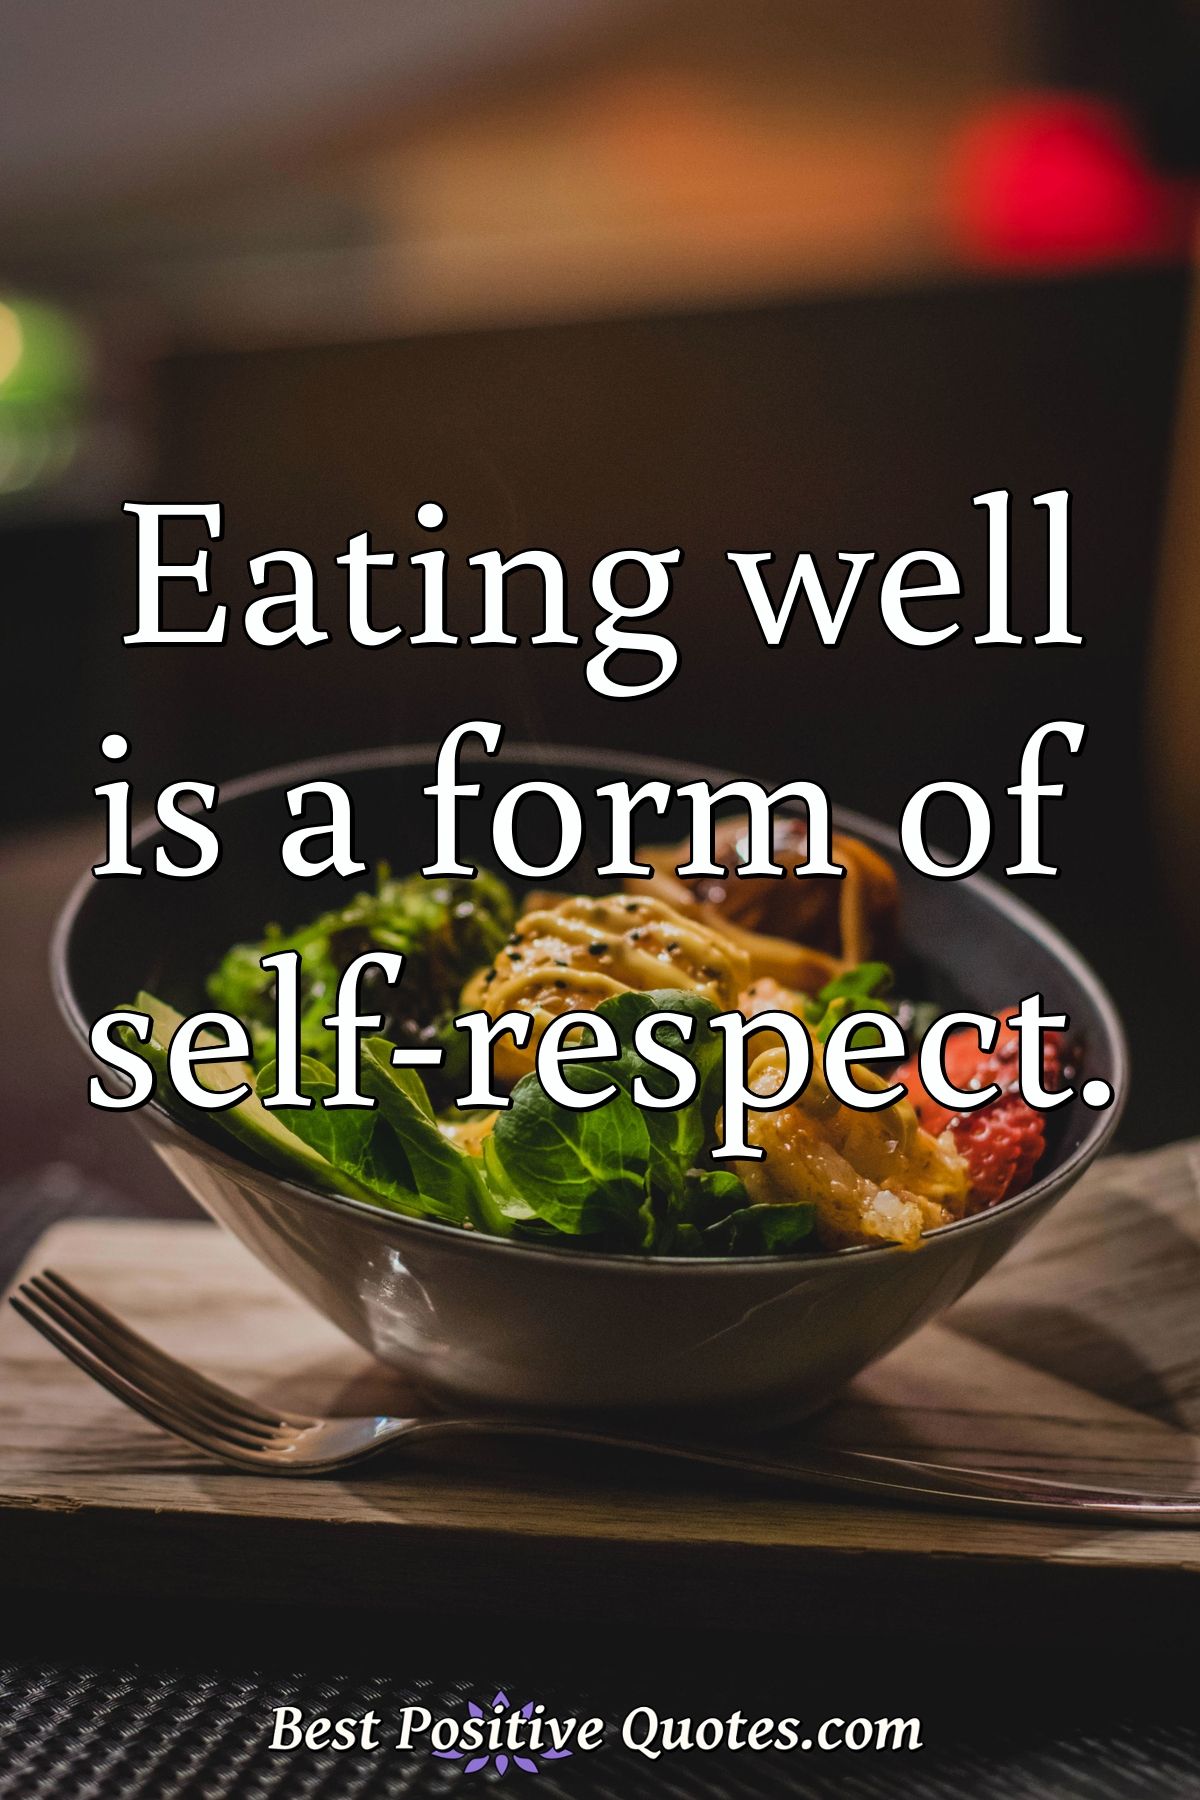 Eating well is a form of self-respect. - Anonymous